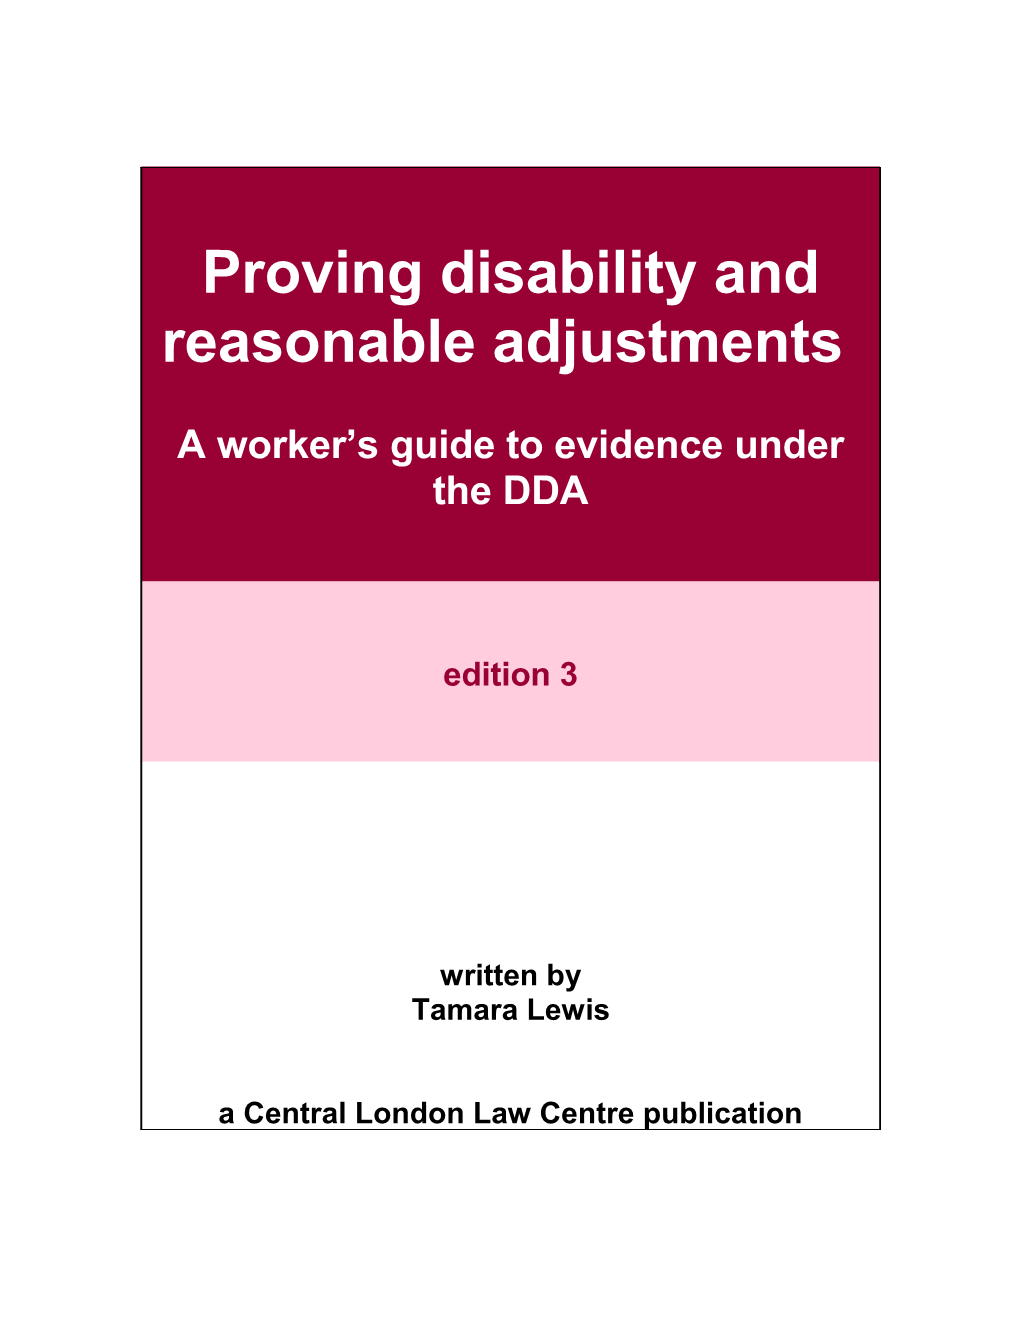 Proving Disability And Reasonable Adjustments: A Worker’S Guide To Evidence Under The DDA